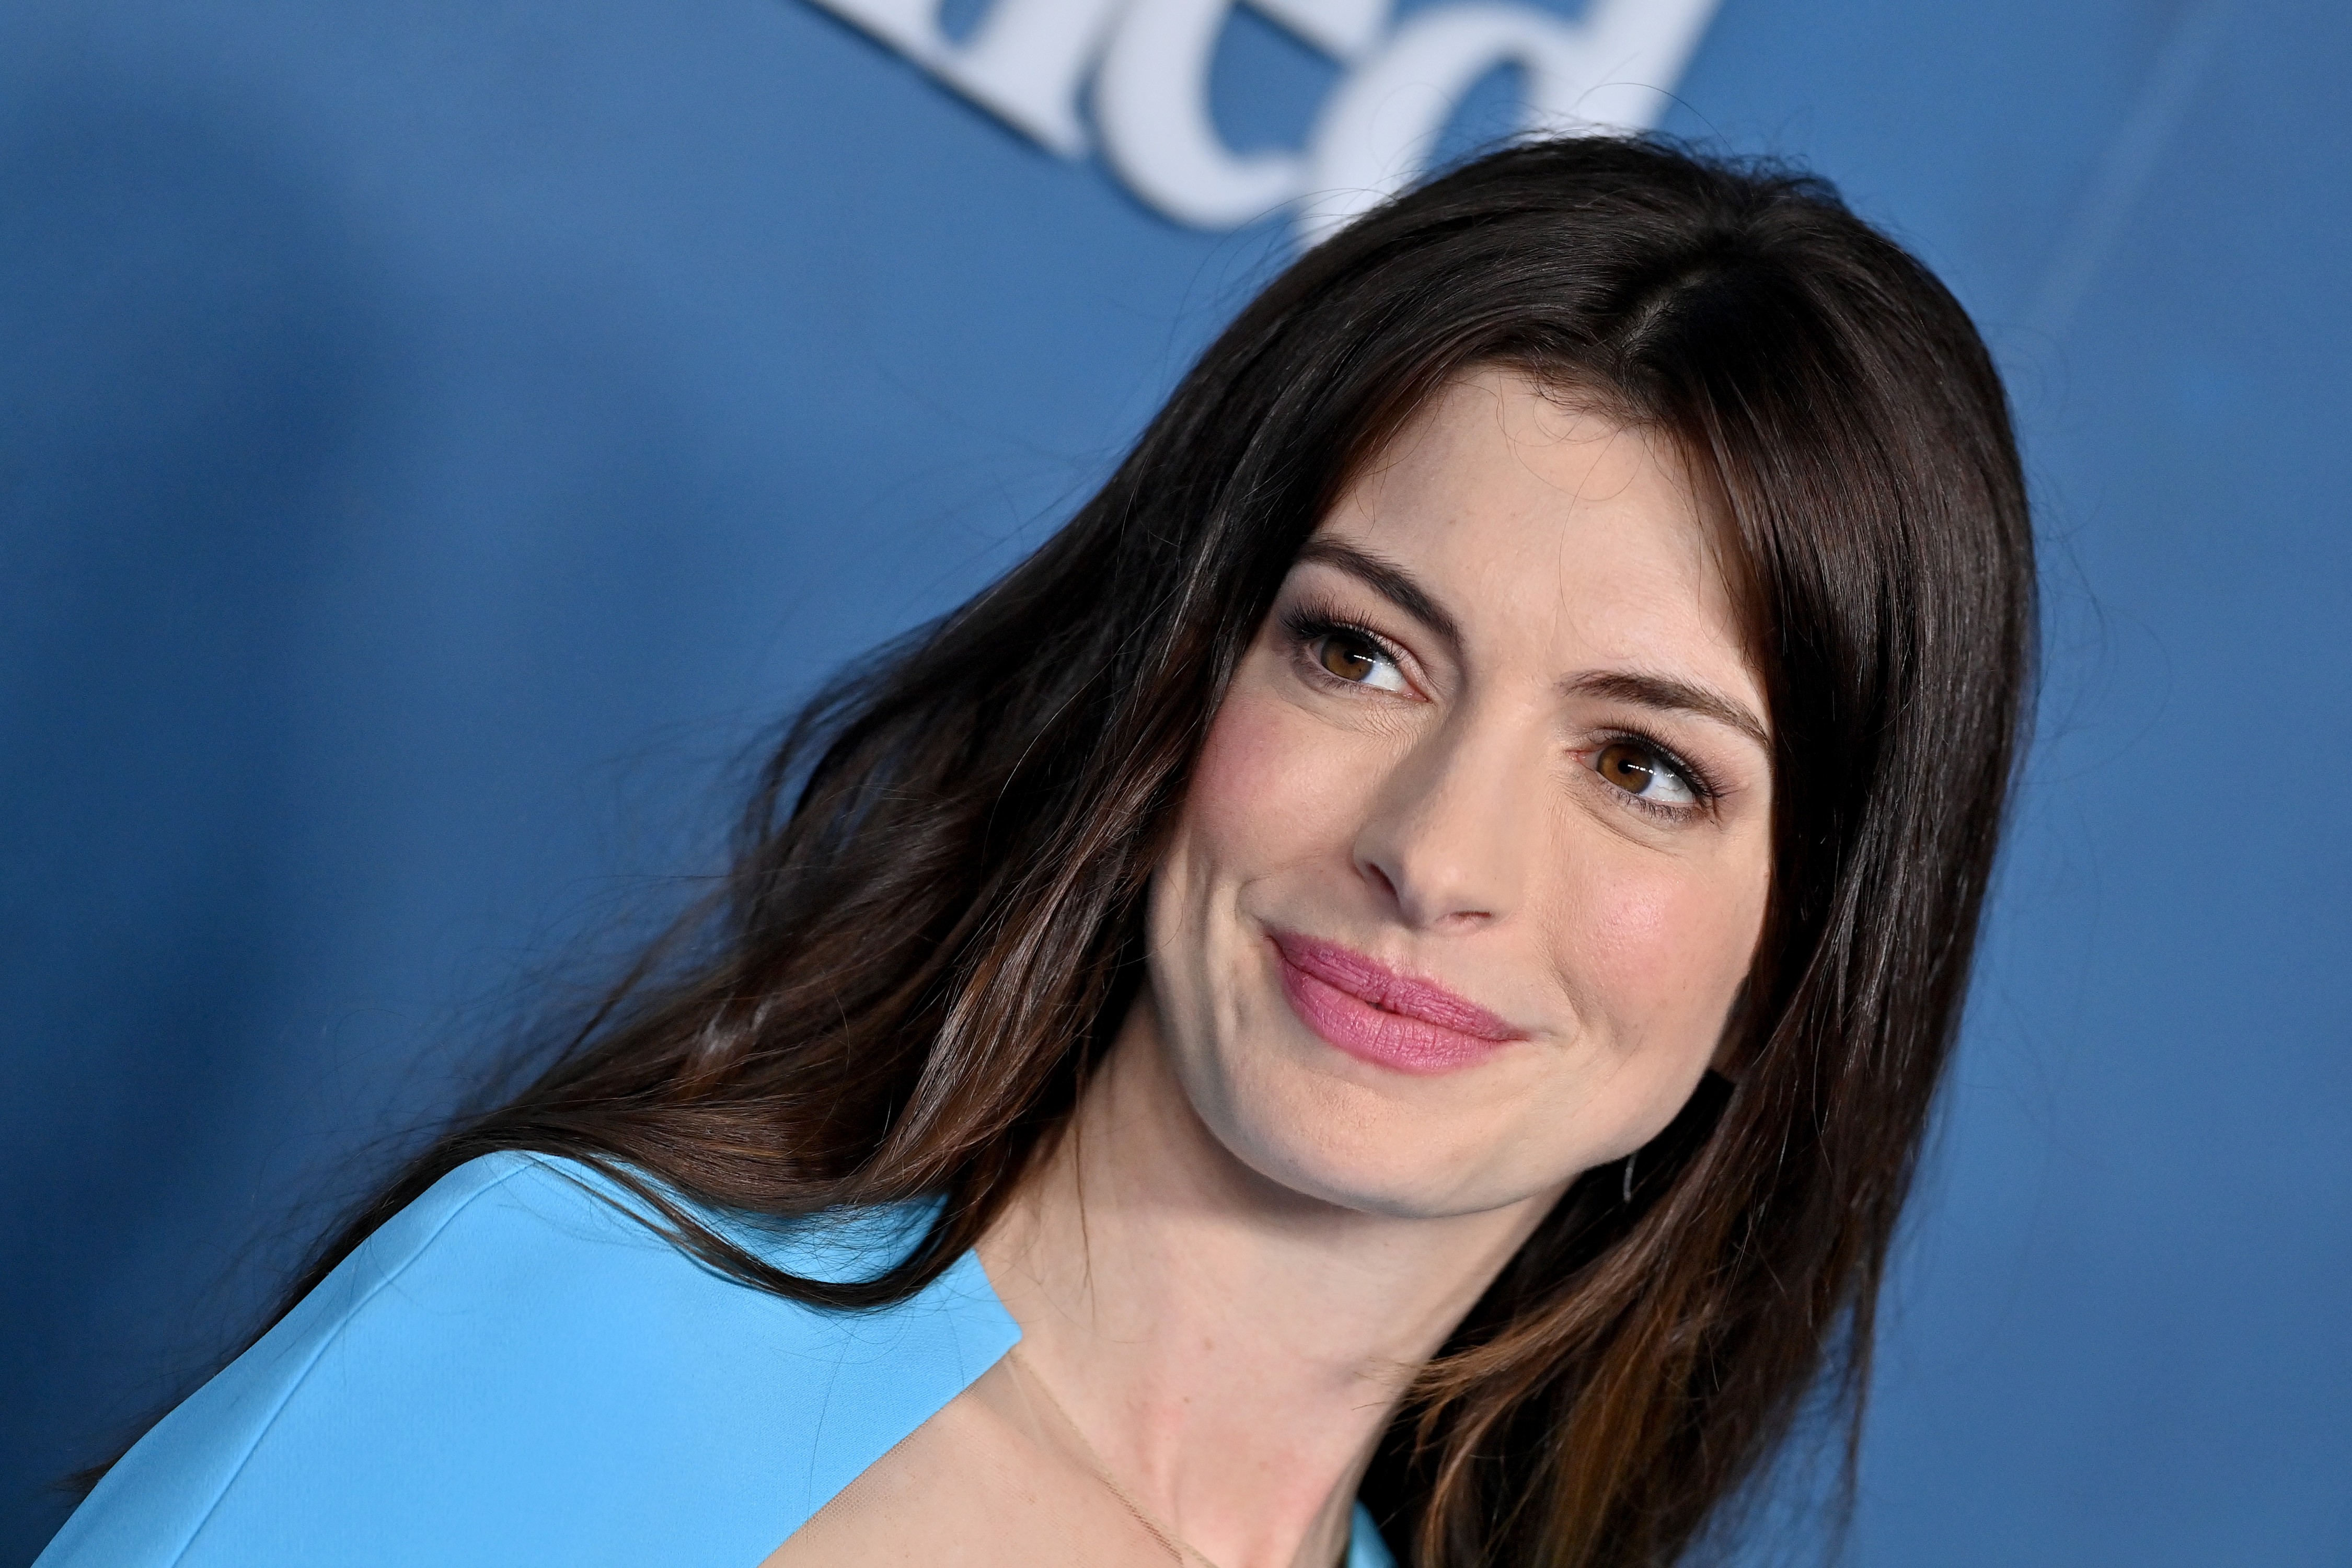 LOS ANGELES, CALIFORNIA - MARCH 17: Anne Hathaway attends the Global Premiere of Apple TV+'s "WeCrashed" at Academy Museum of Motion Pictures on March 17, 2022 in Los Angeles, California. (Photo by Axelle/Bauer-Griffin/FilmMagic) (Foto: FilmMagic)